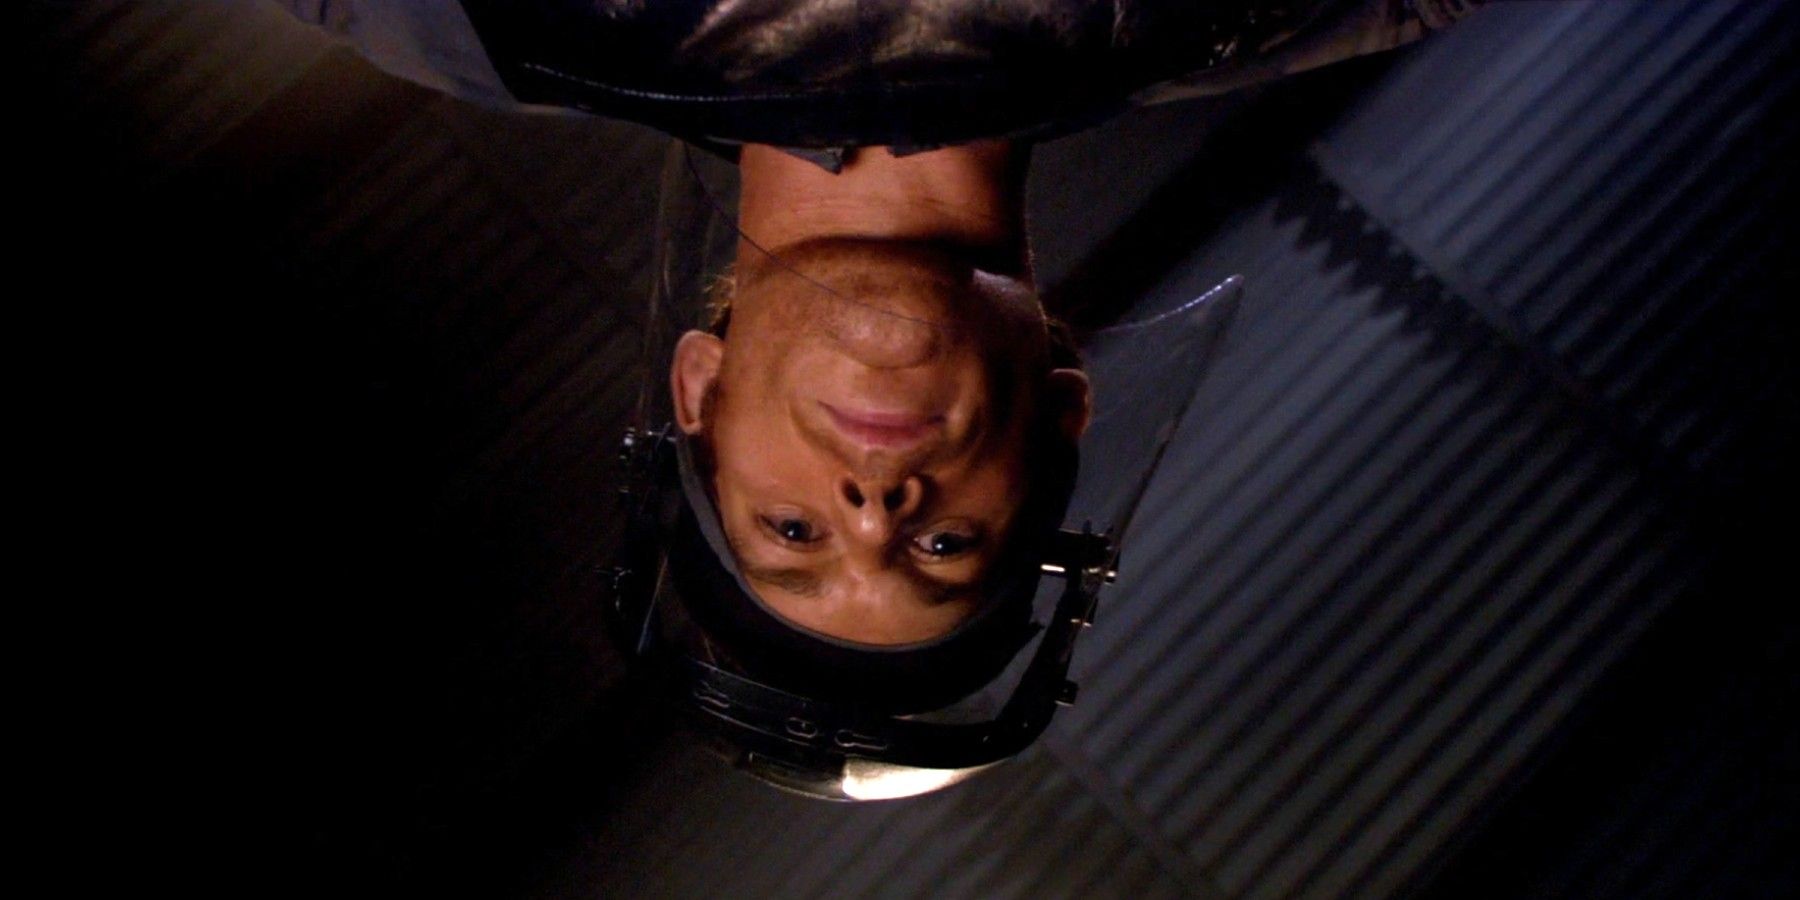 An image of Dexter looking down at the table in Dexter